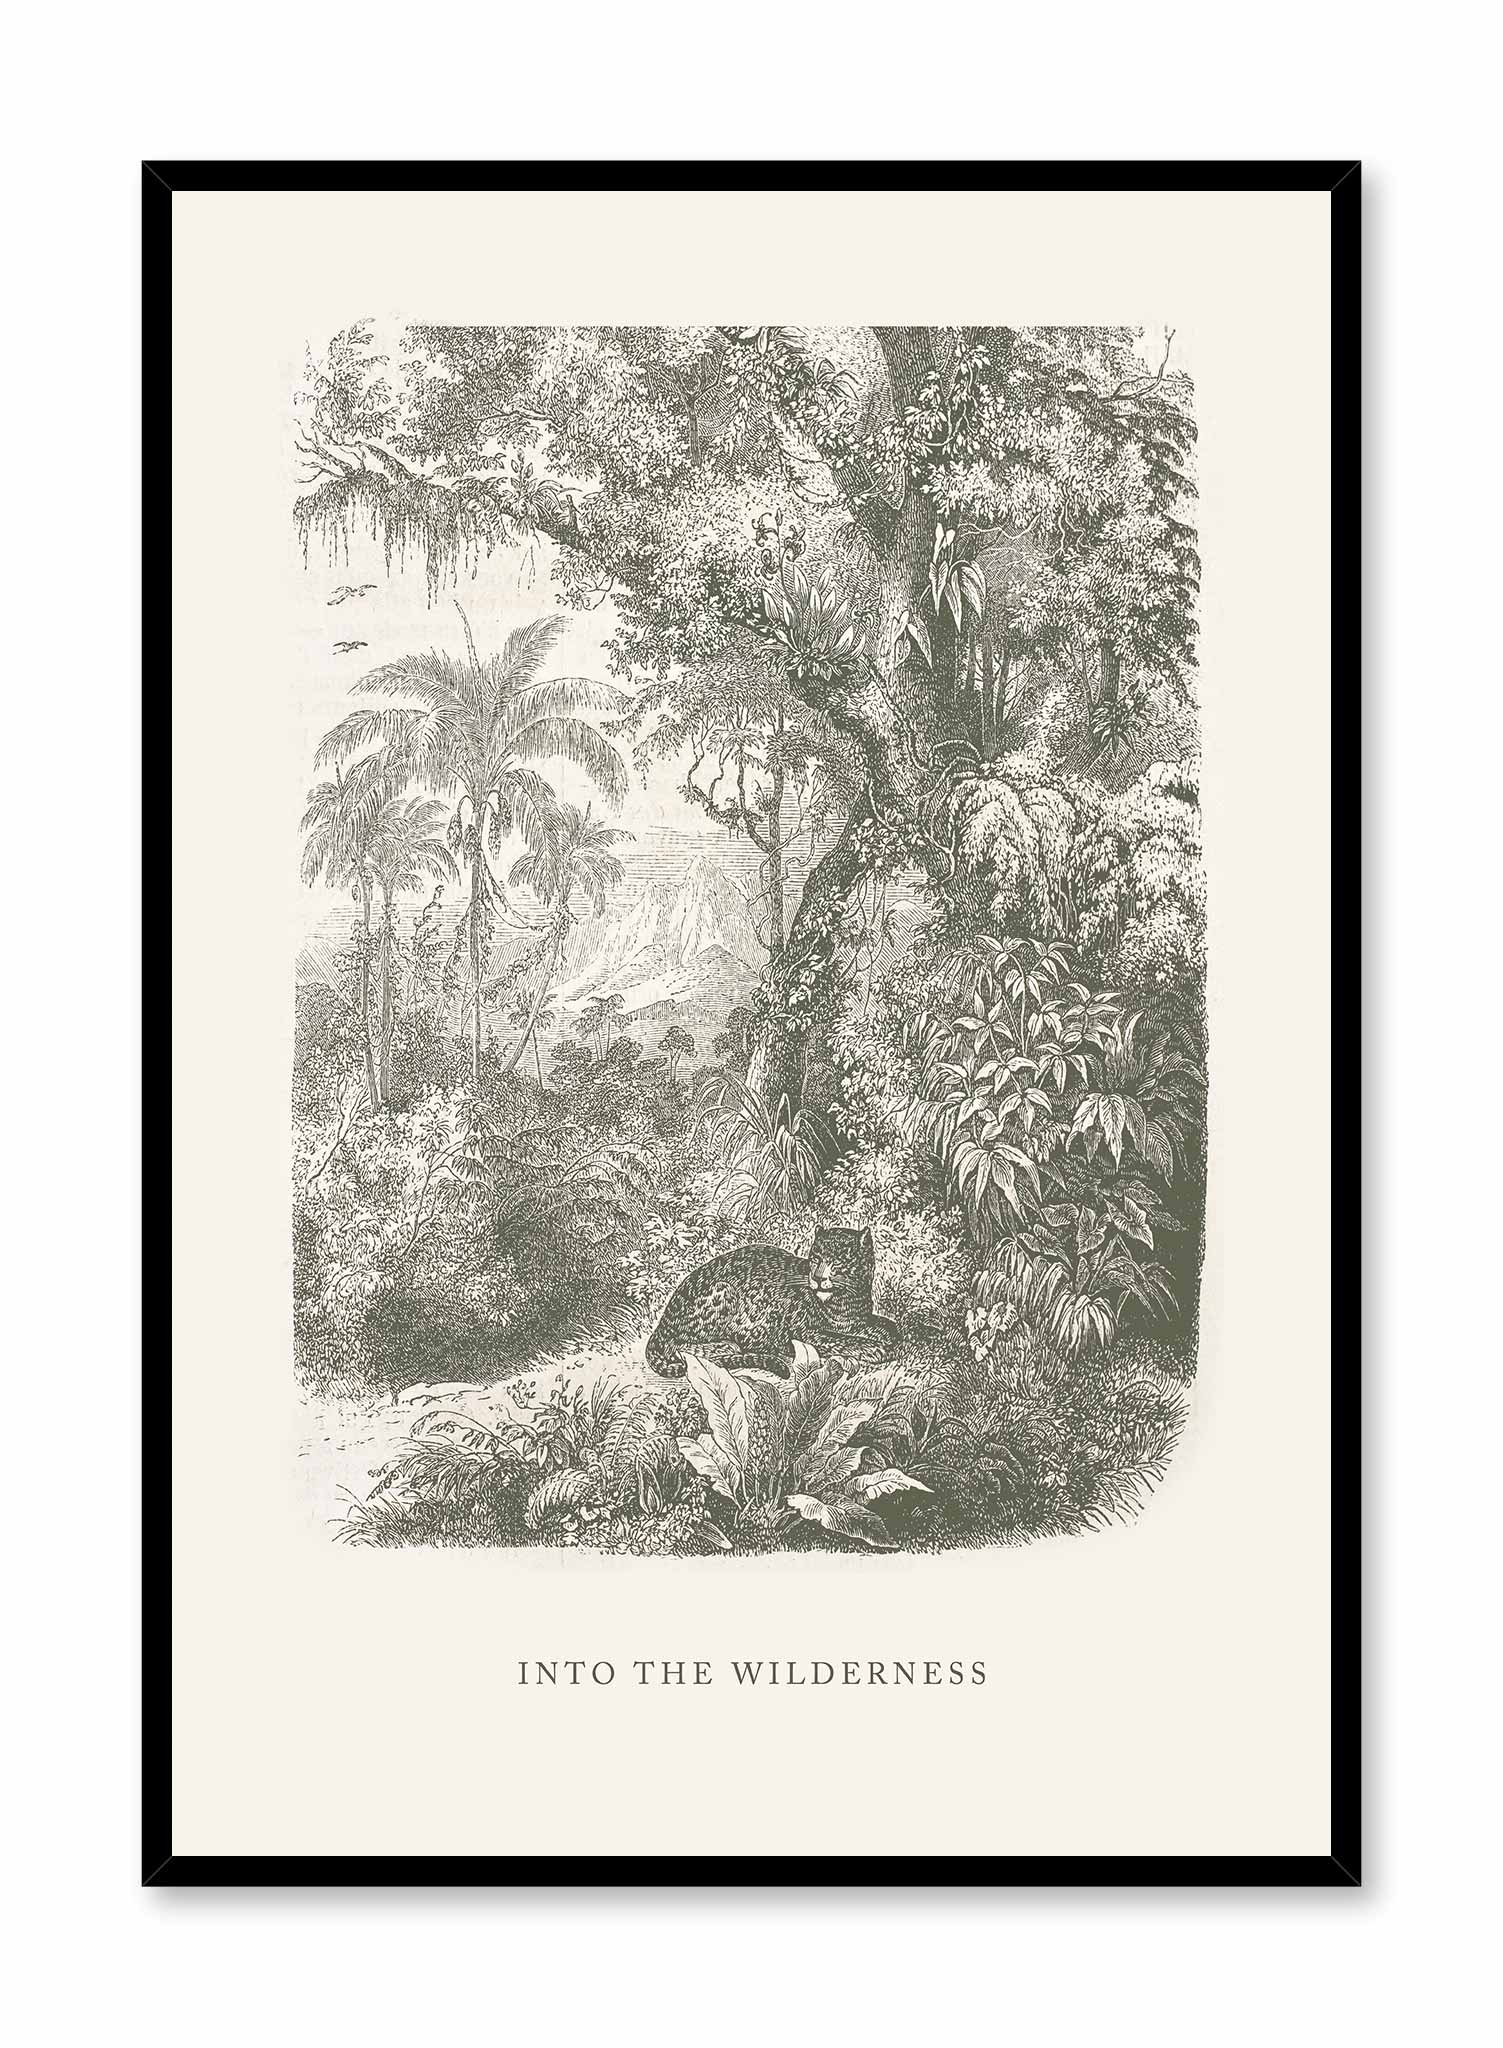 Antique Jungle is a minimalist of a cheetah resting under the shadow of the jungle's tall trees by Opposite Wall.